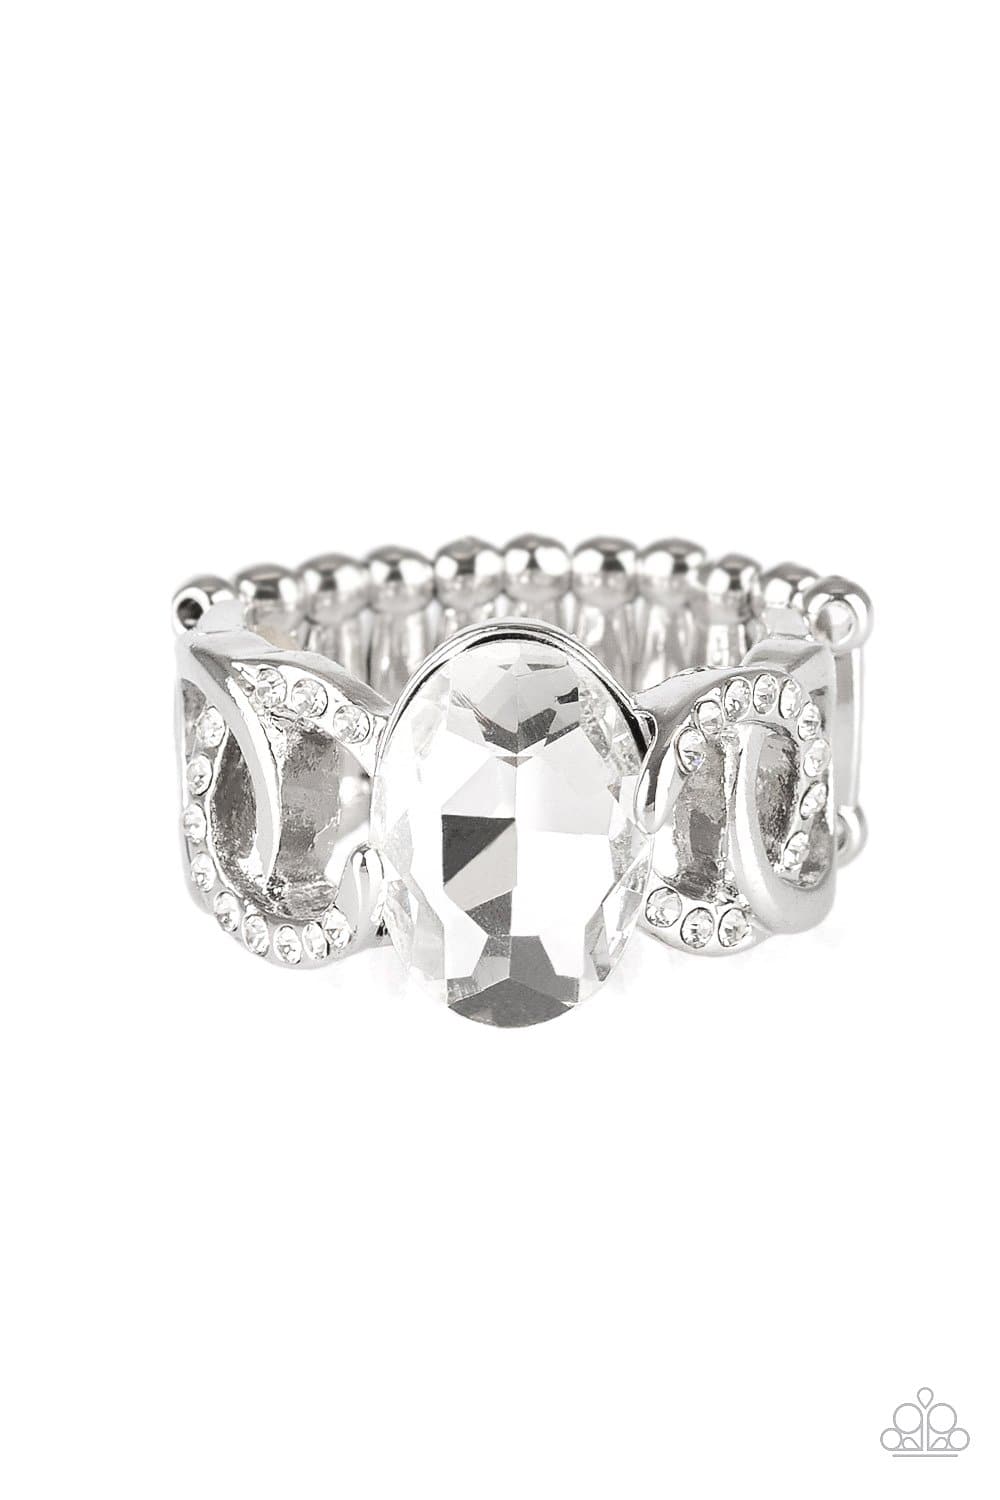 C4 - Supreme Bling White Ring by Paparazzi Accessories on Fancy5Fashion.com